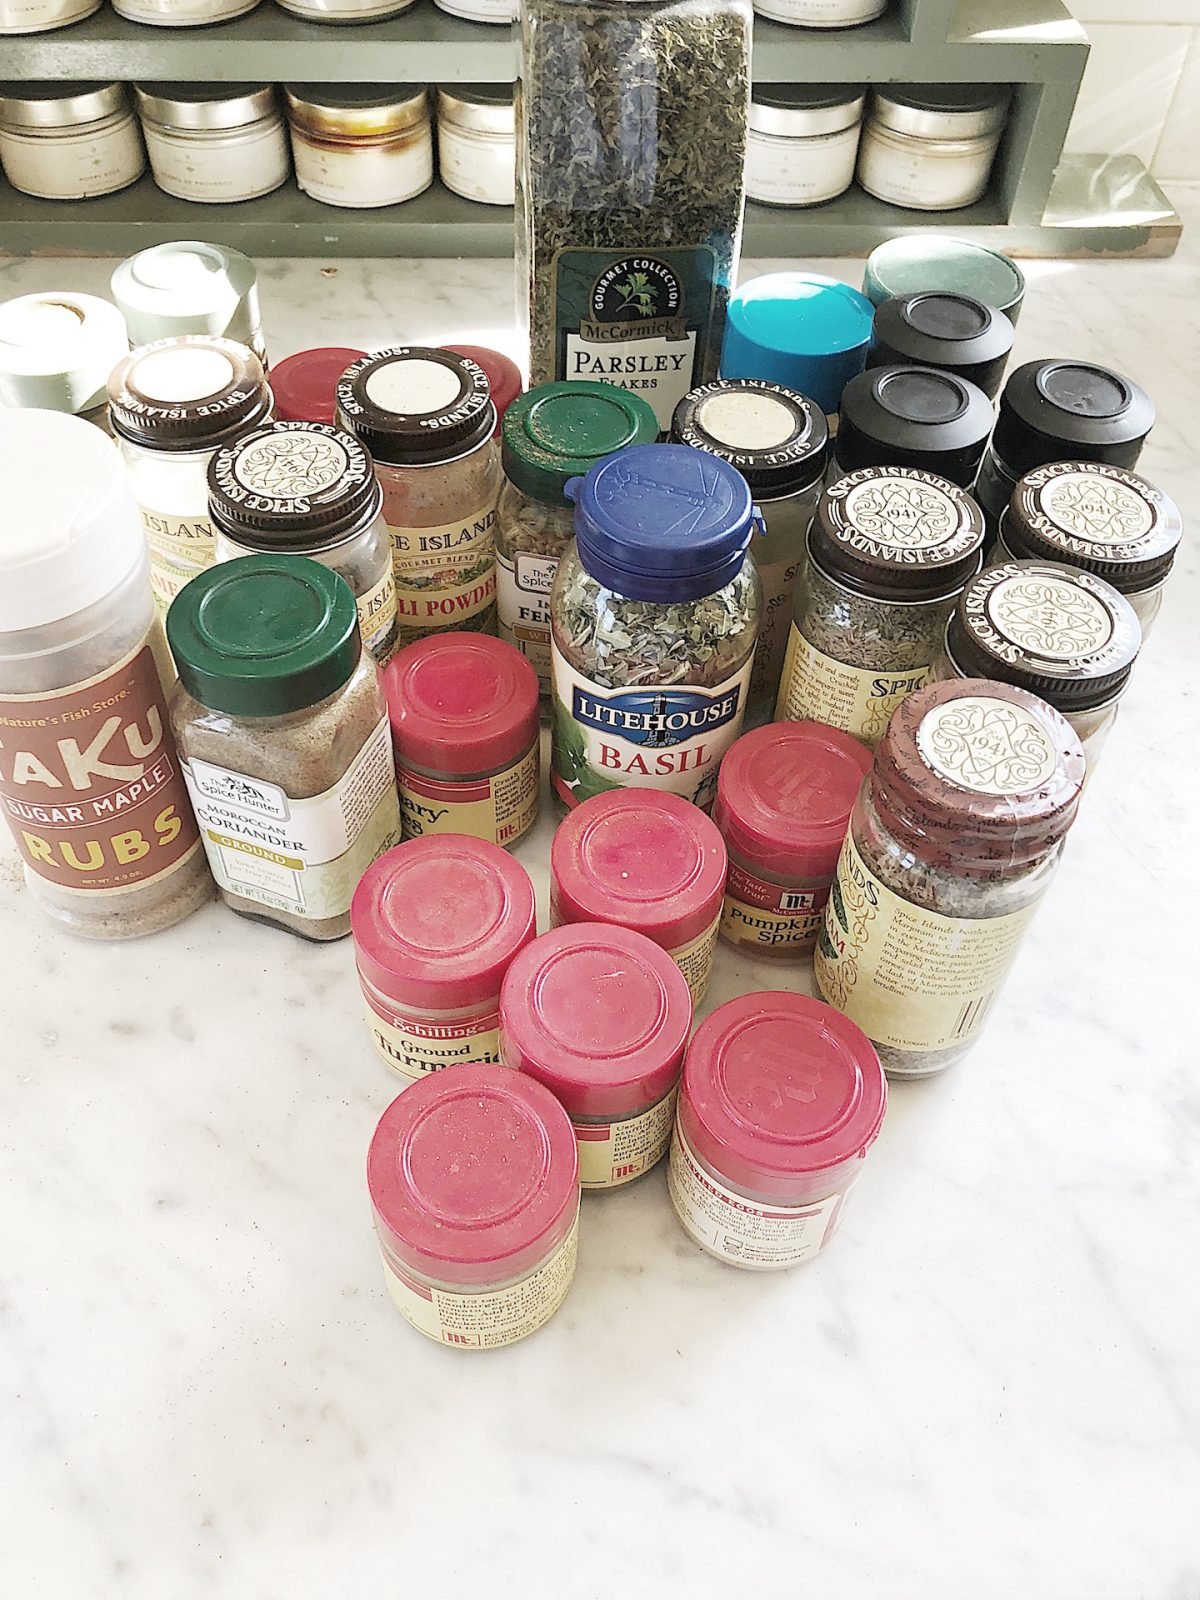 organizing your spice jars and checking expiration dates